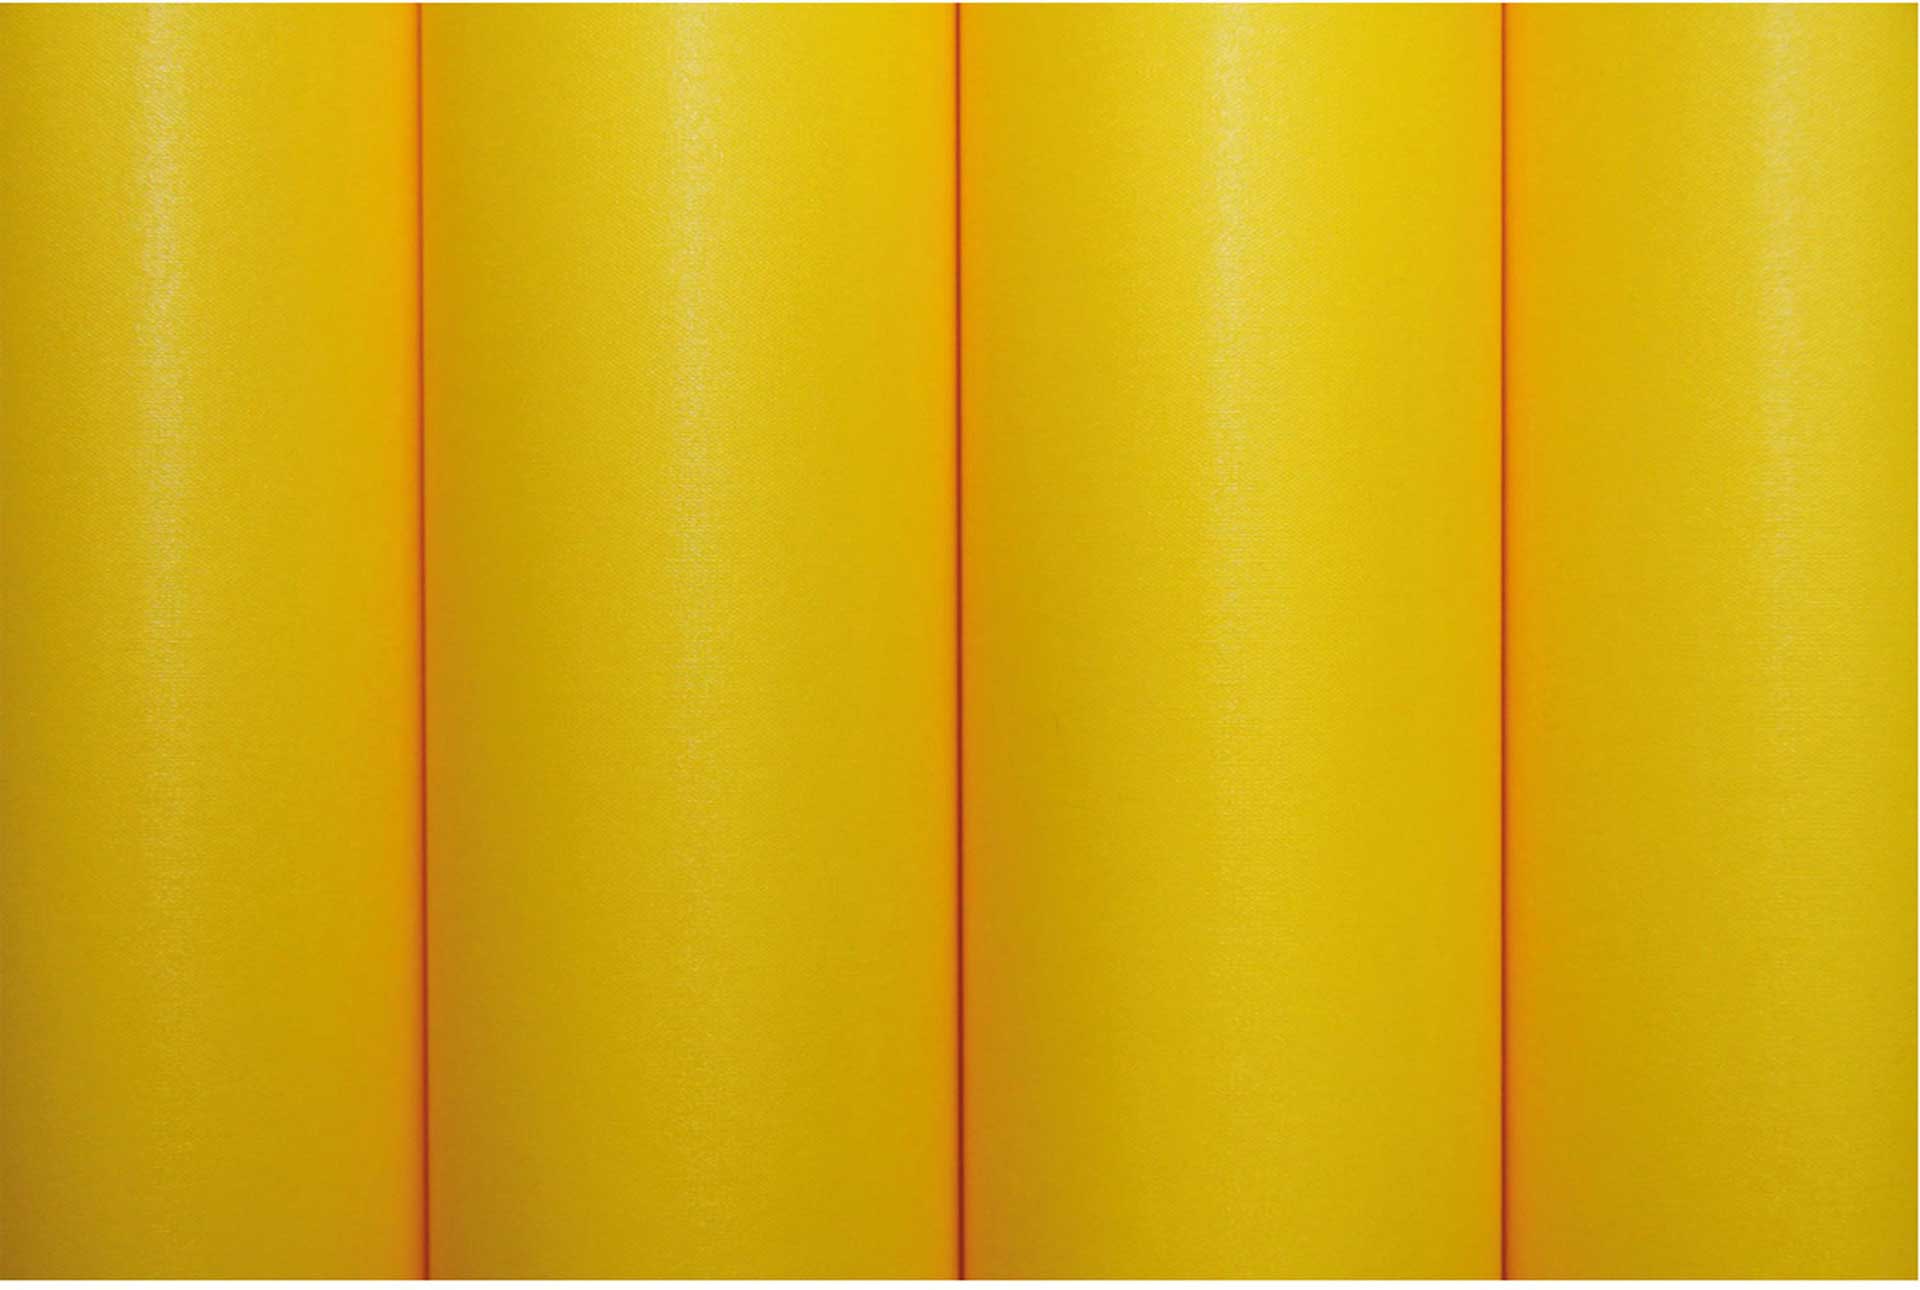 ORACOVER ORATEX Fabric Foil Classic Cub Yellow #30 A 3 Metres